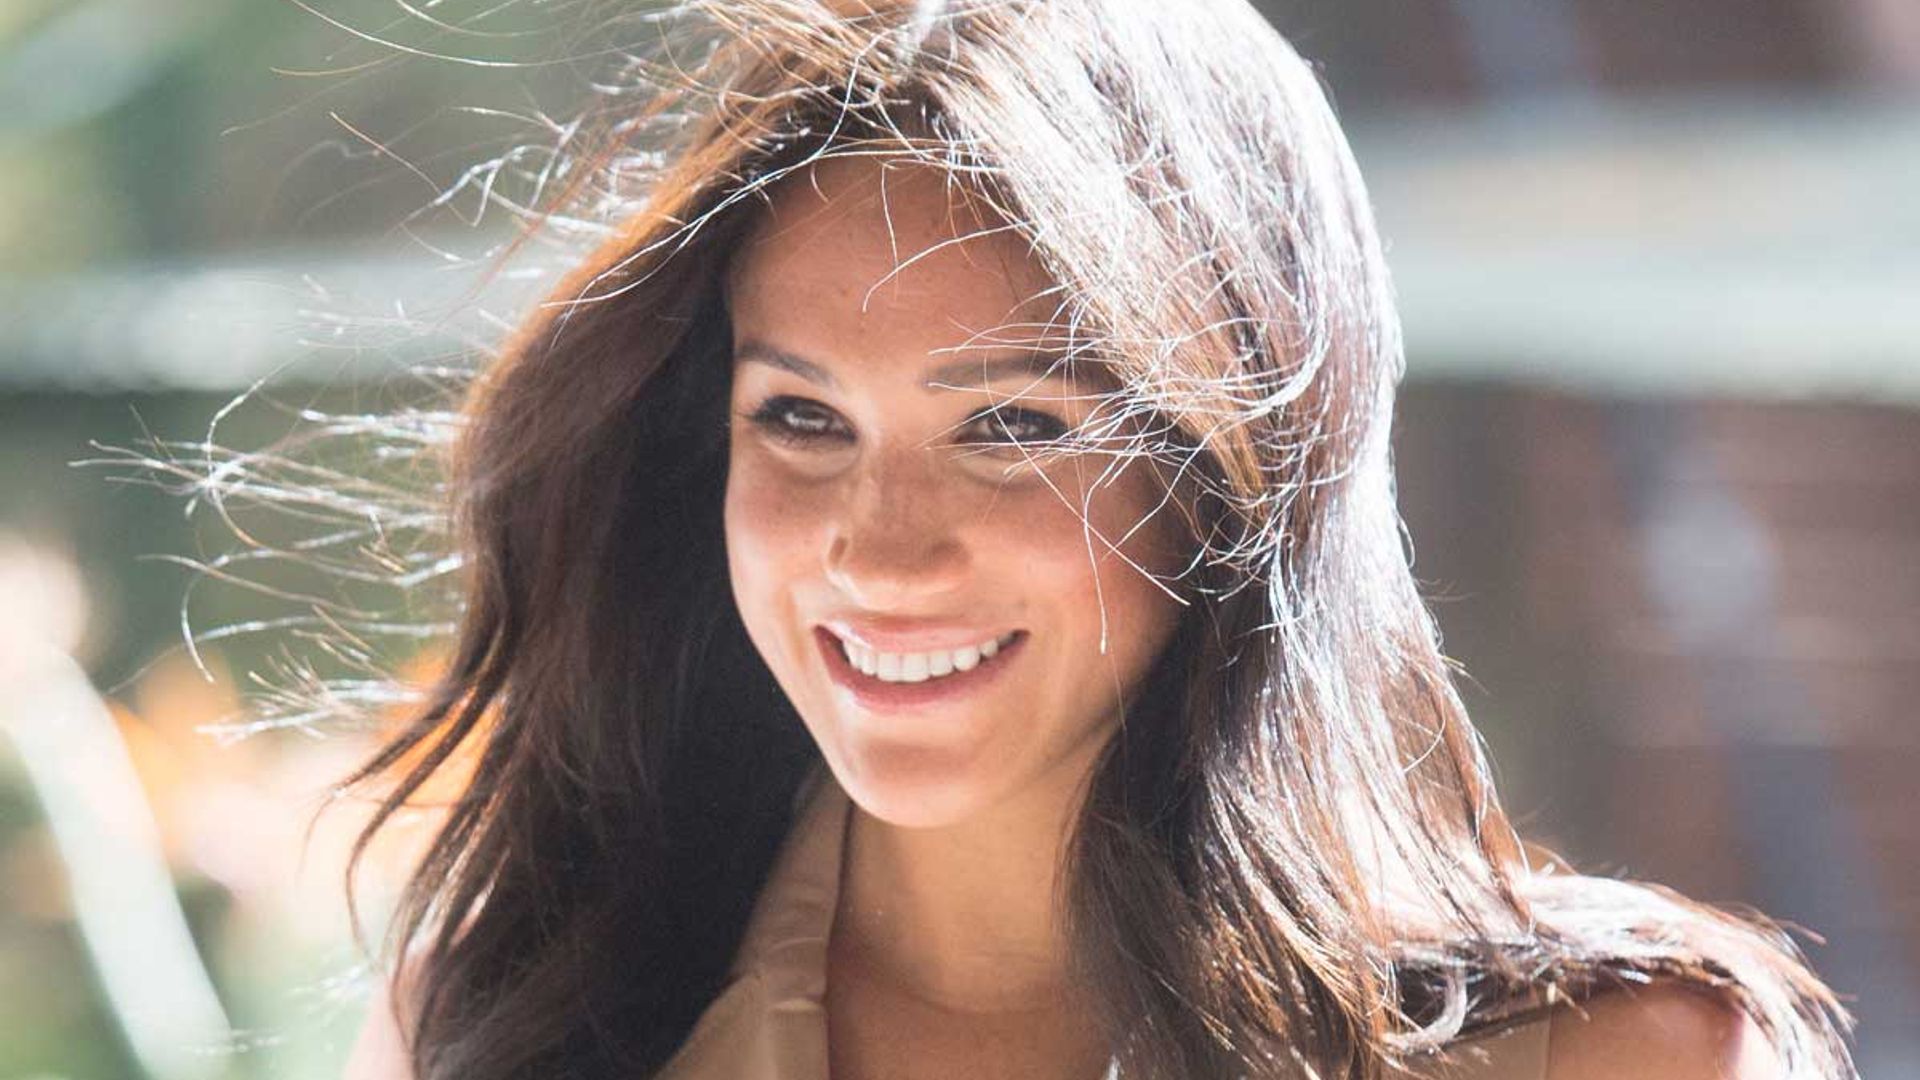 Meghan Markle's best friend gives rare insight into new Californian lifestyle